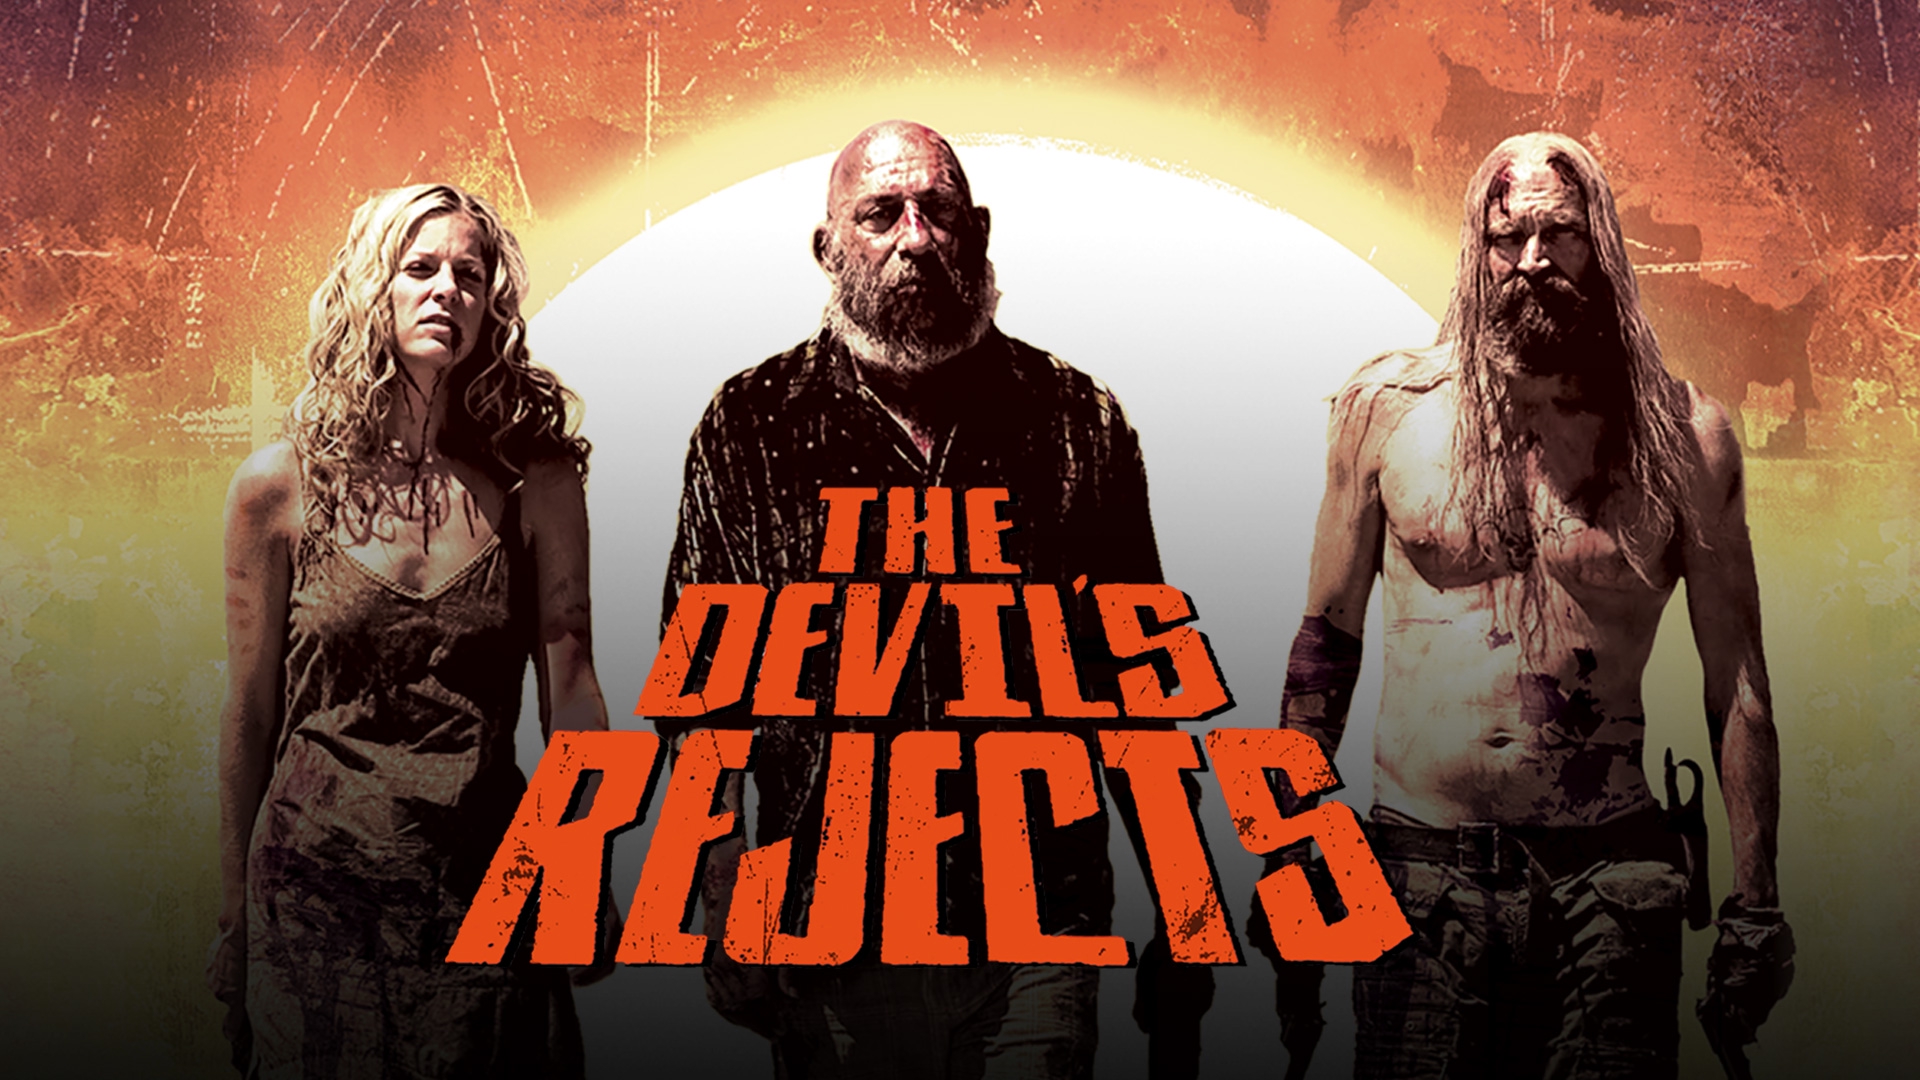 Stream The Devils Rejects Online Download And Watch Hd Movies Stan